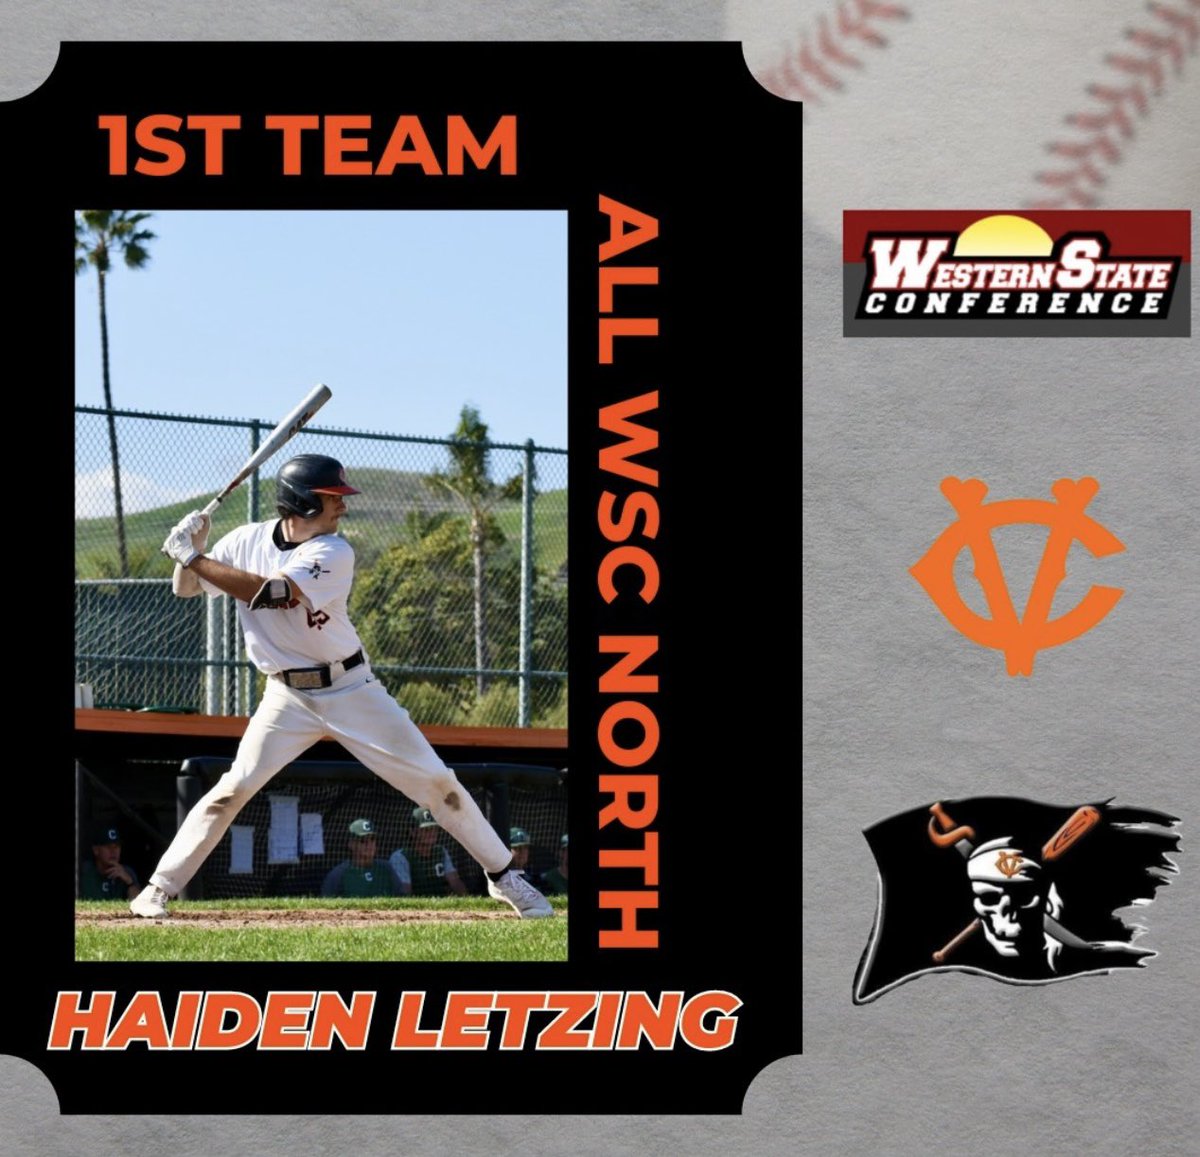 Congratulations to Haiden Letzing on earning  1st Team All-Western State Conference this season.